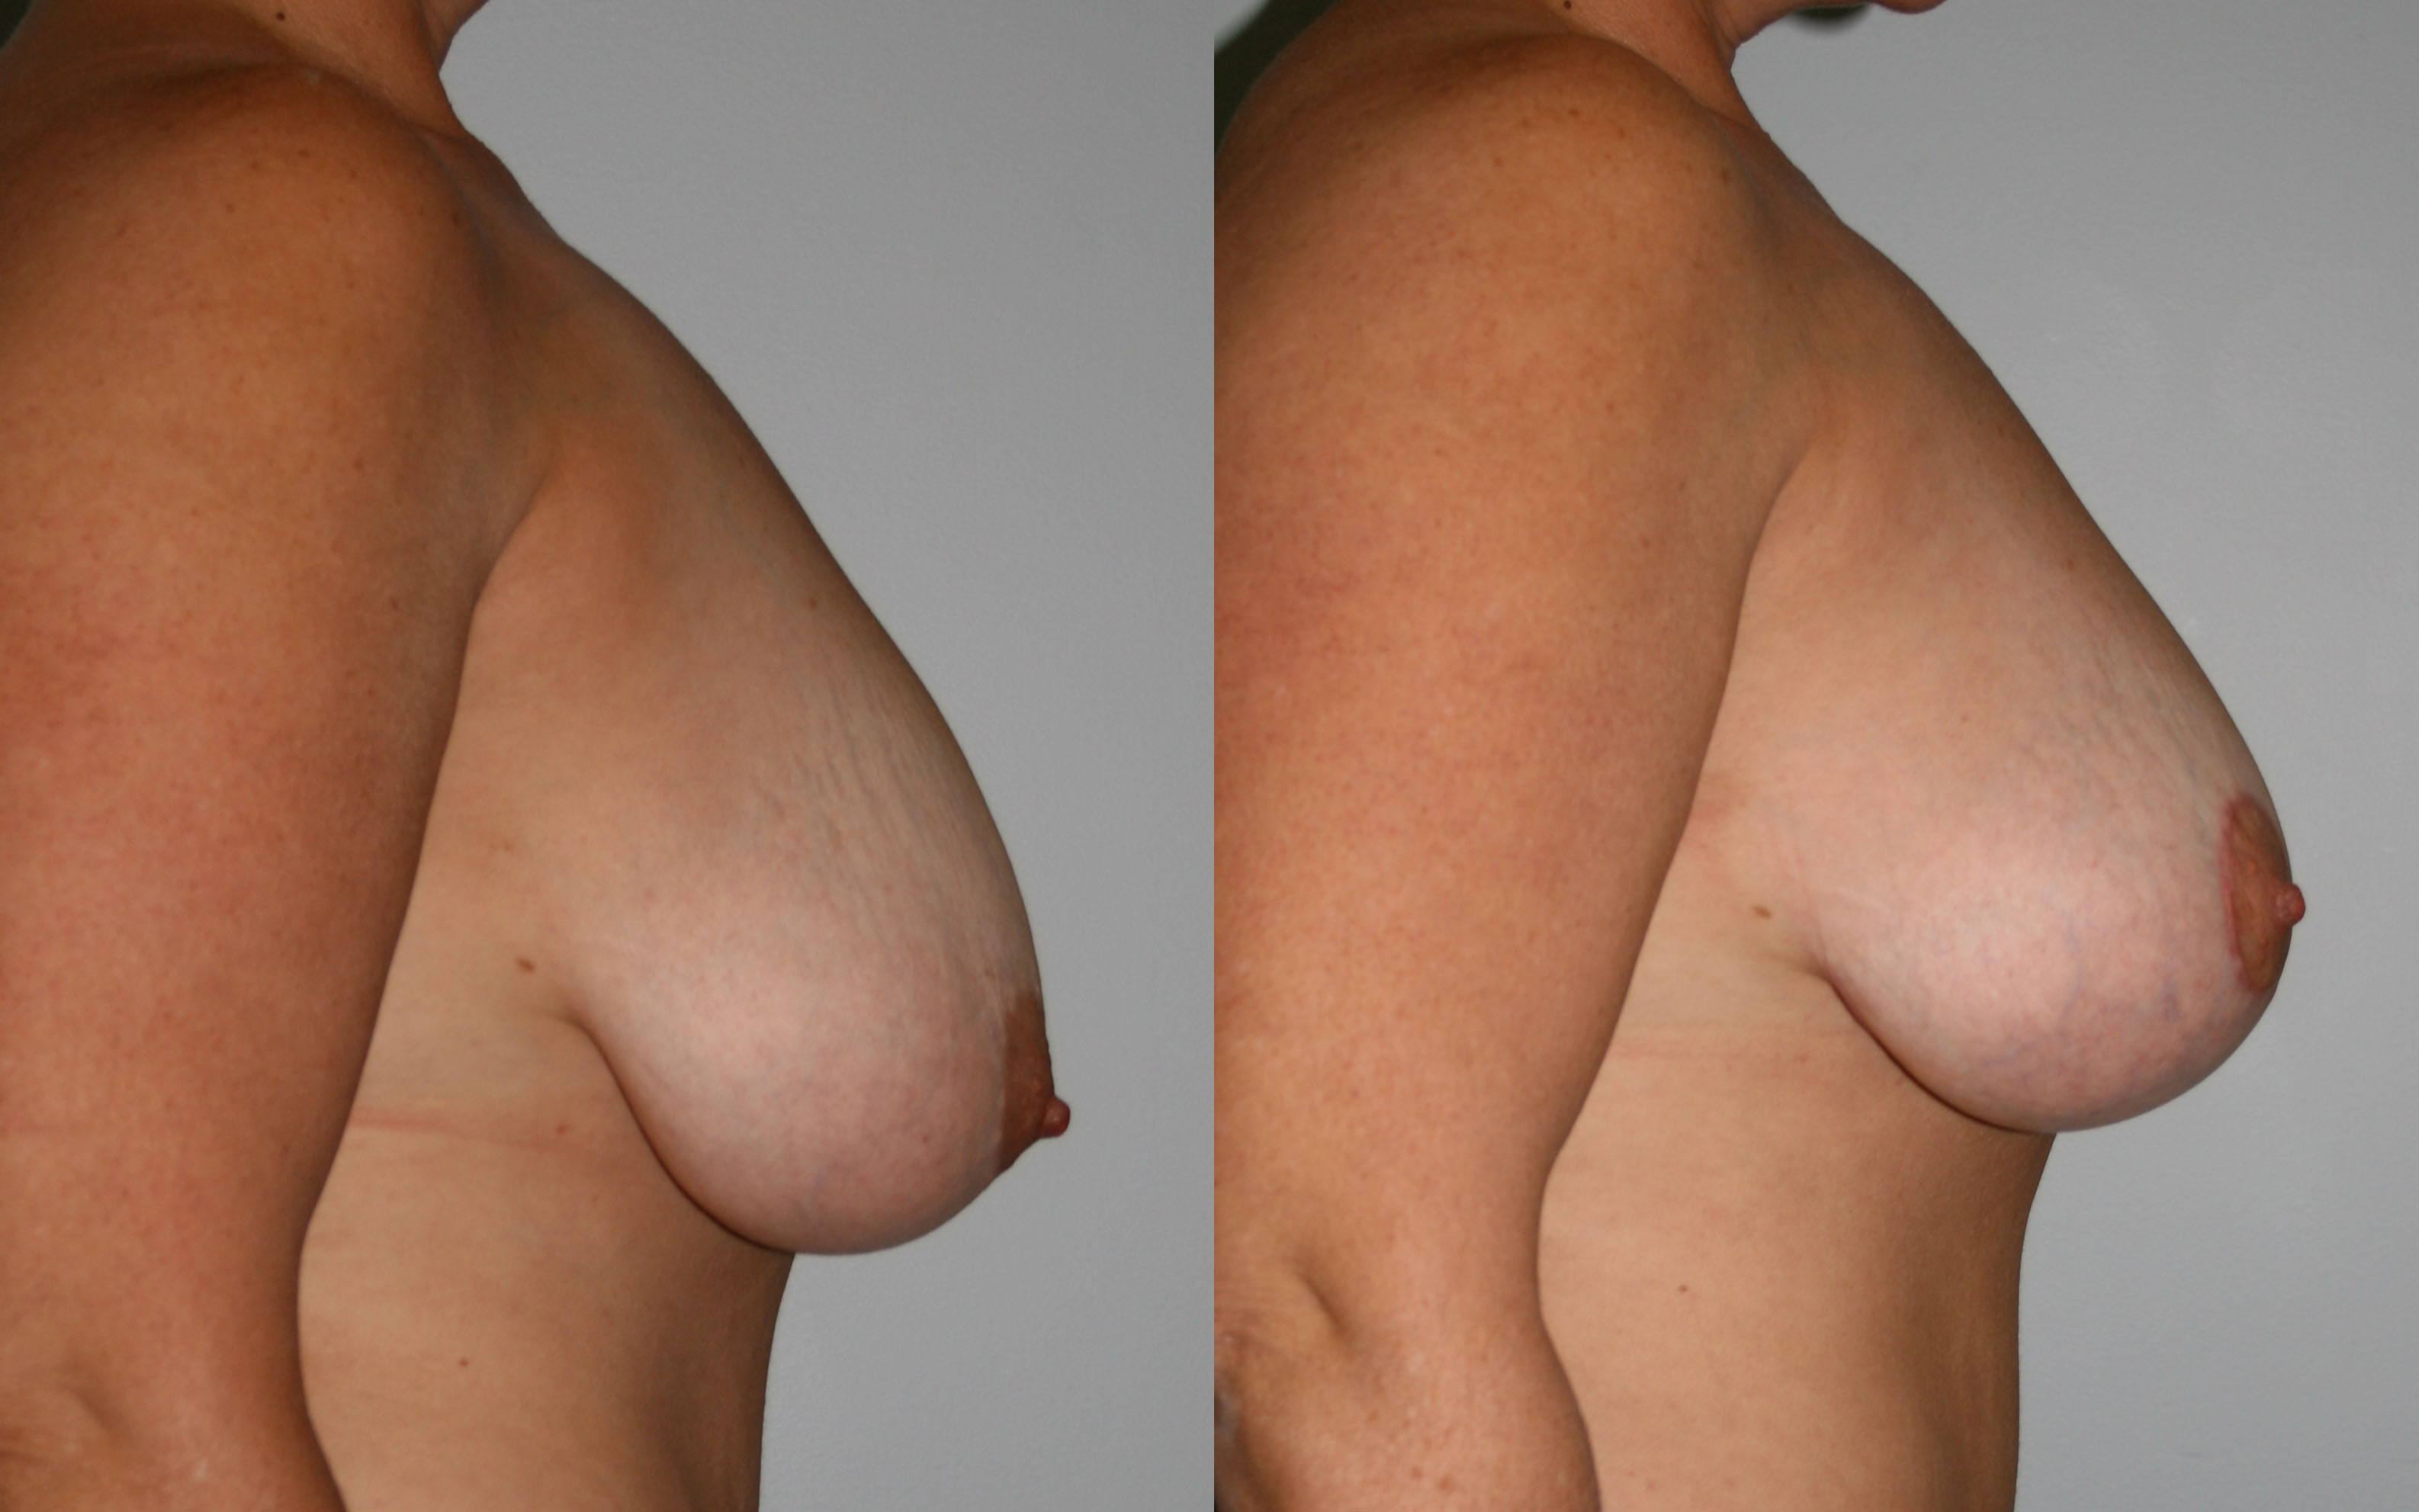 Before and After Breast Lift Photos